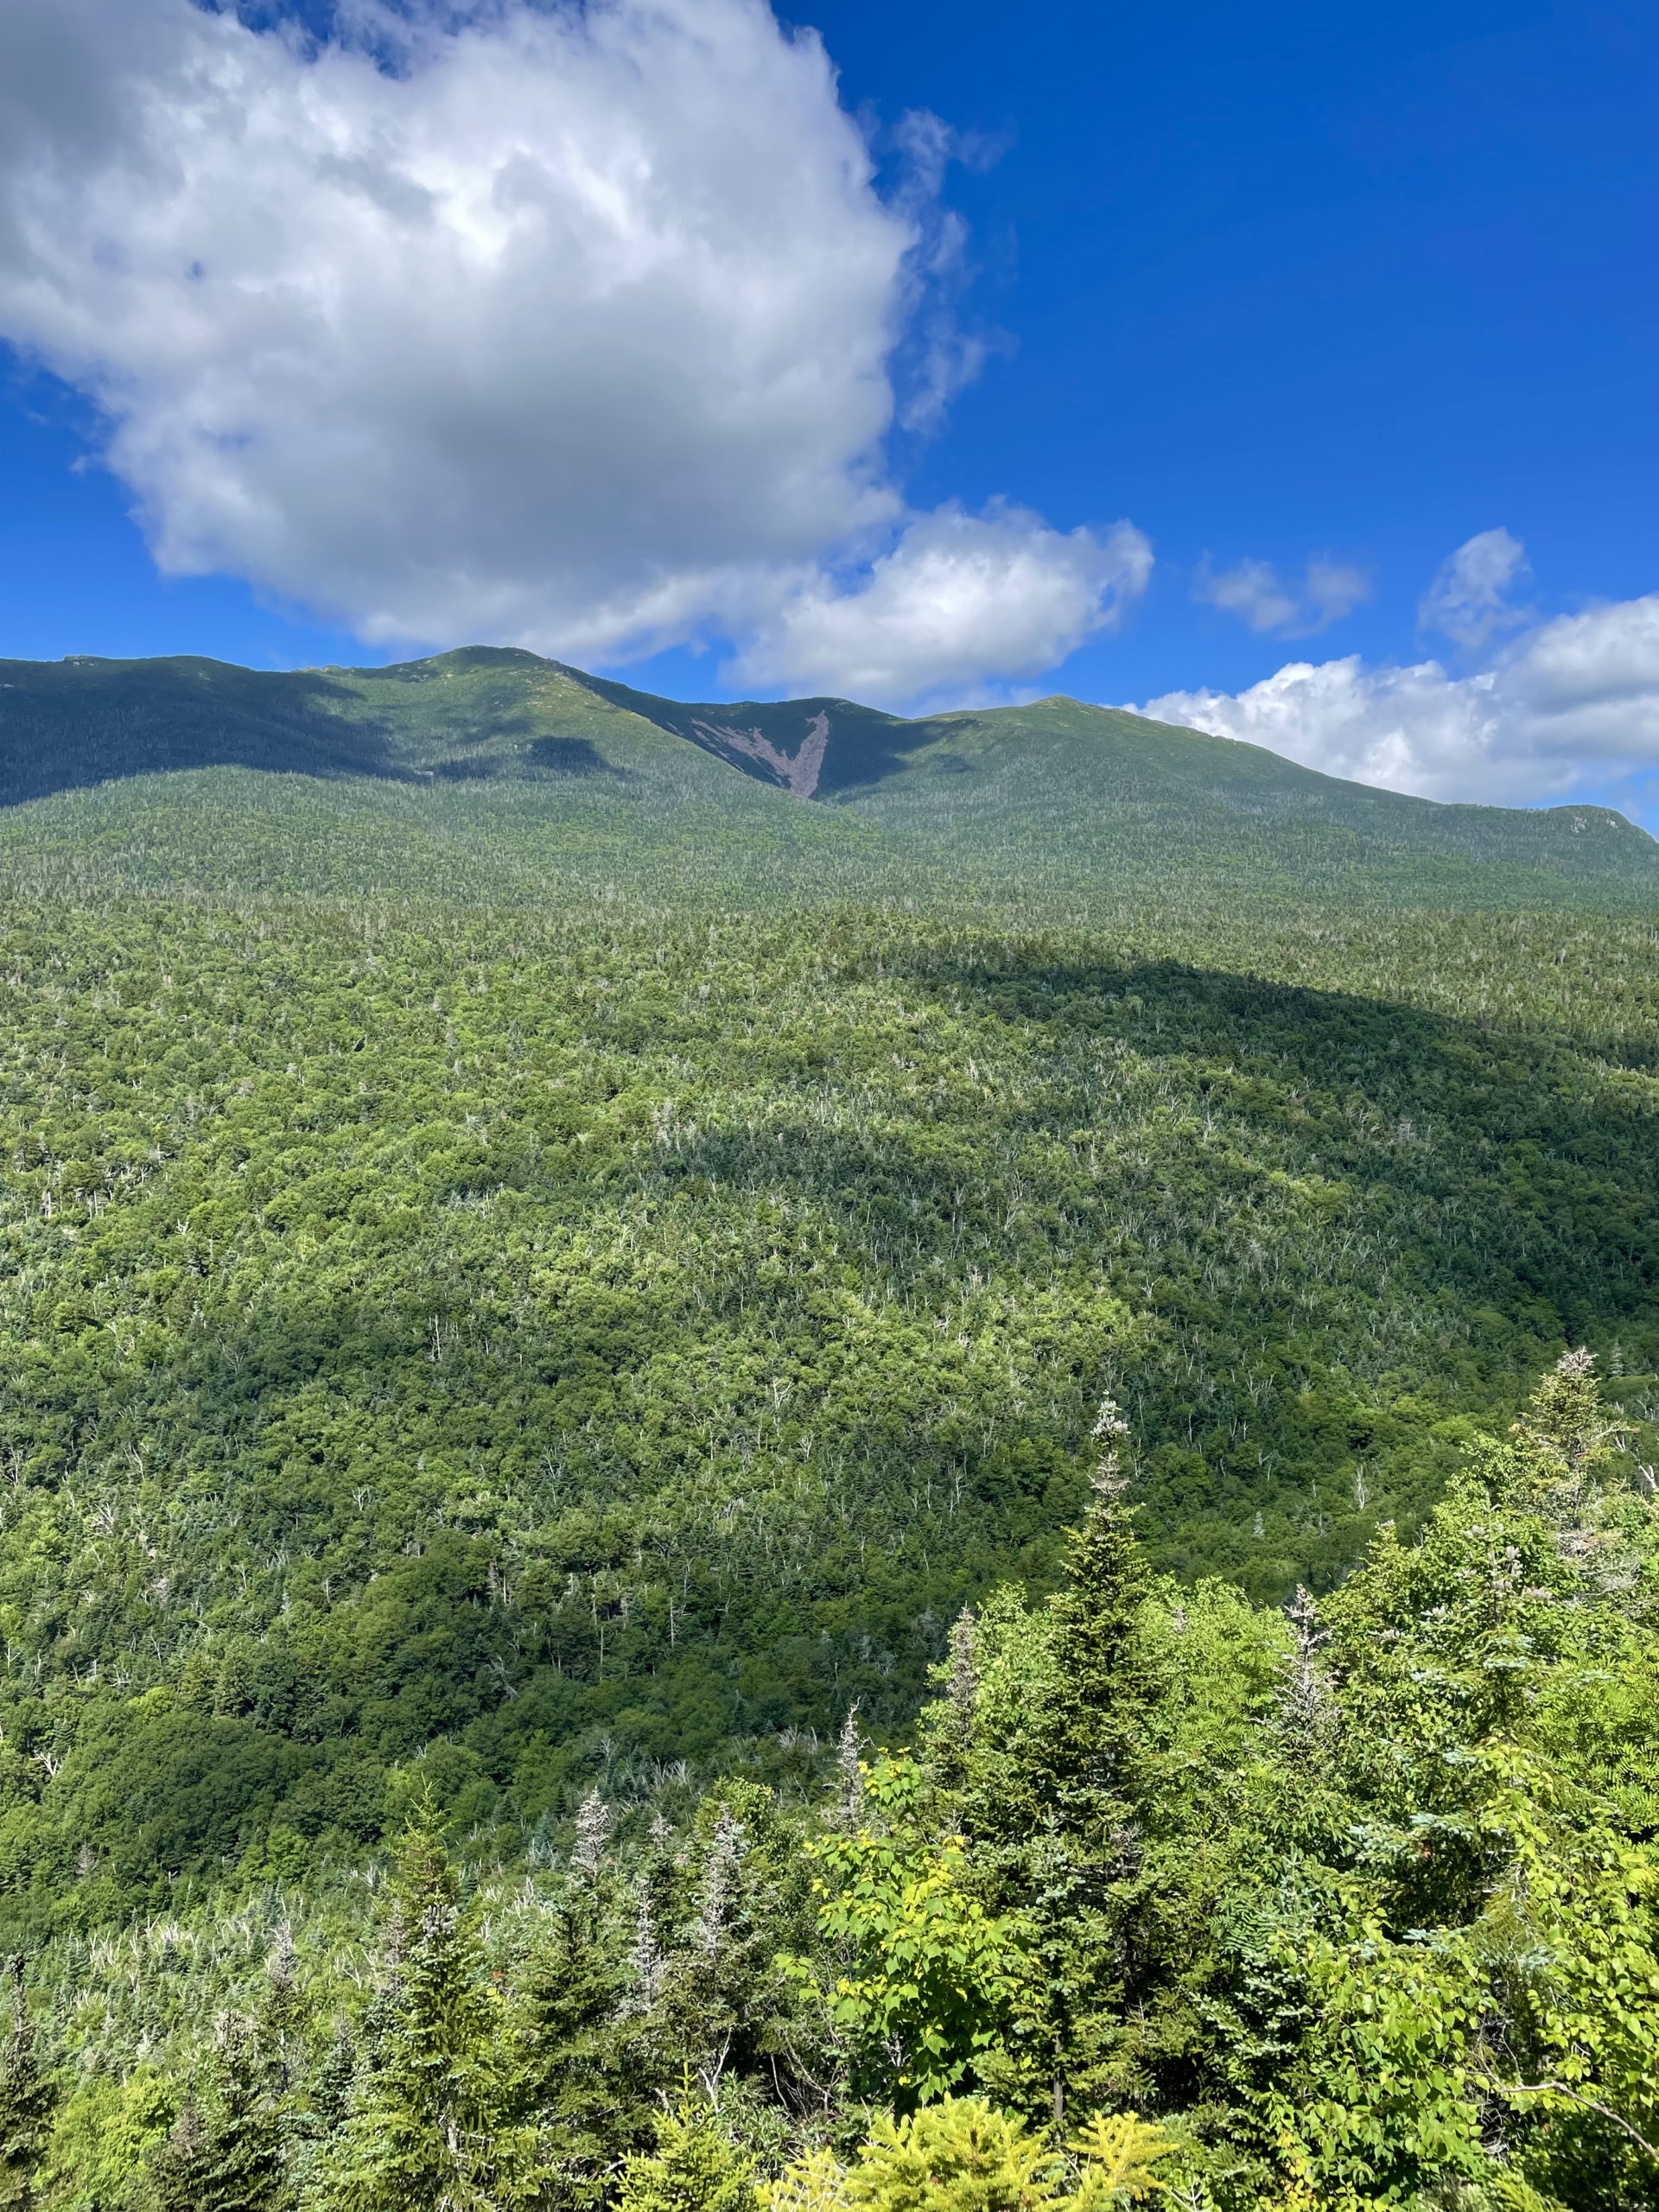 Franconia Ridge from Owl's Head Path, seen while hiking Owl's Head Mtn in the White Mountain National Forest, New Hampshire